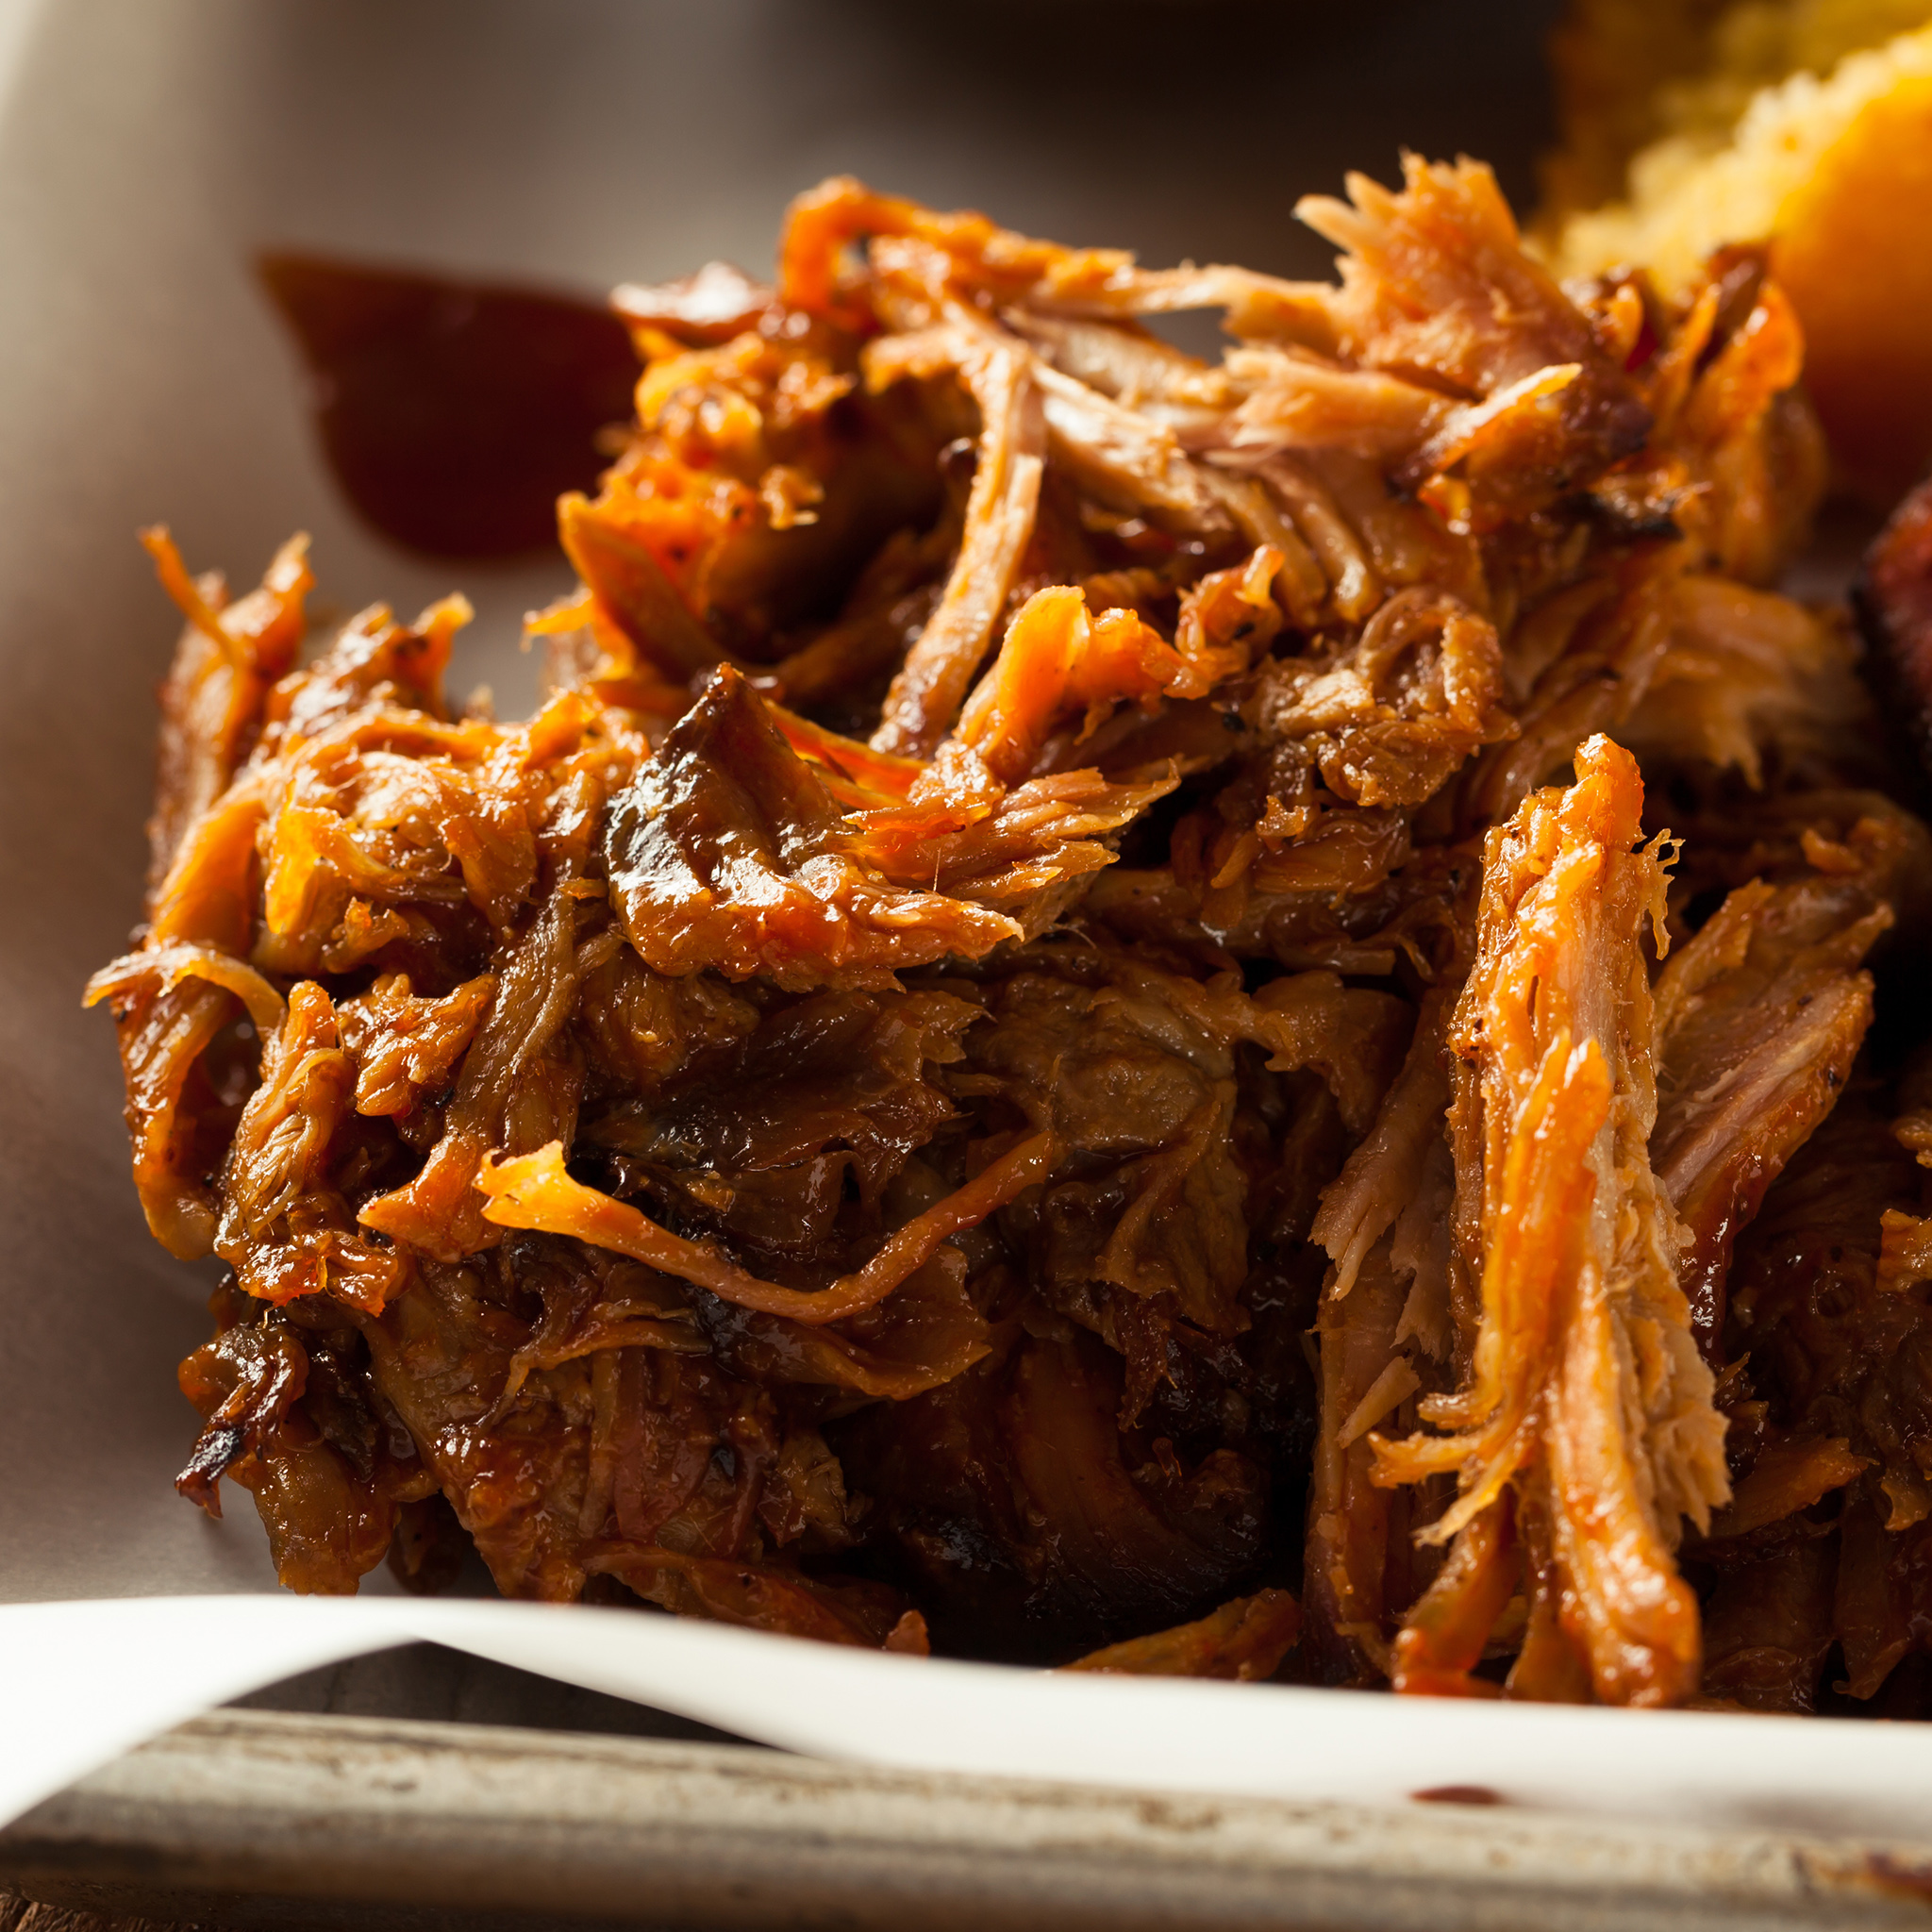 Pulled Pork from MFBC